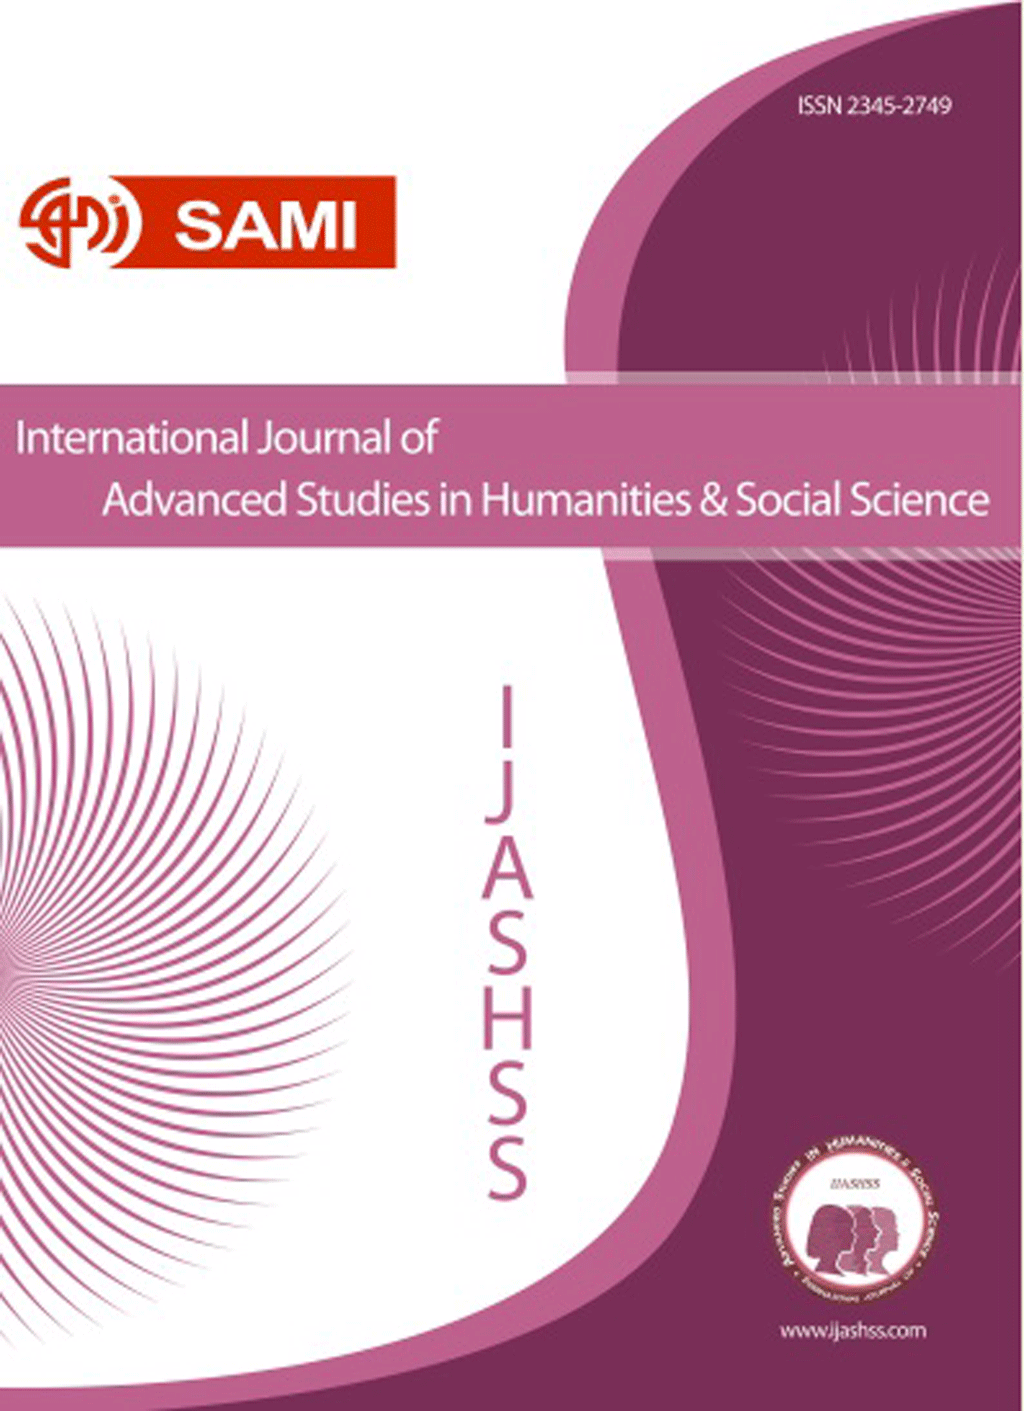 International Journal of Advanced Studies in Humanities and Social Science - October 2018, Volume 7 -  Issue 4